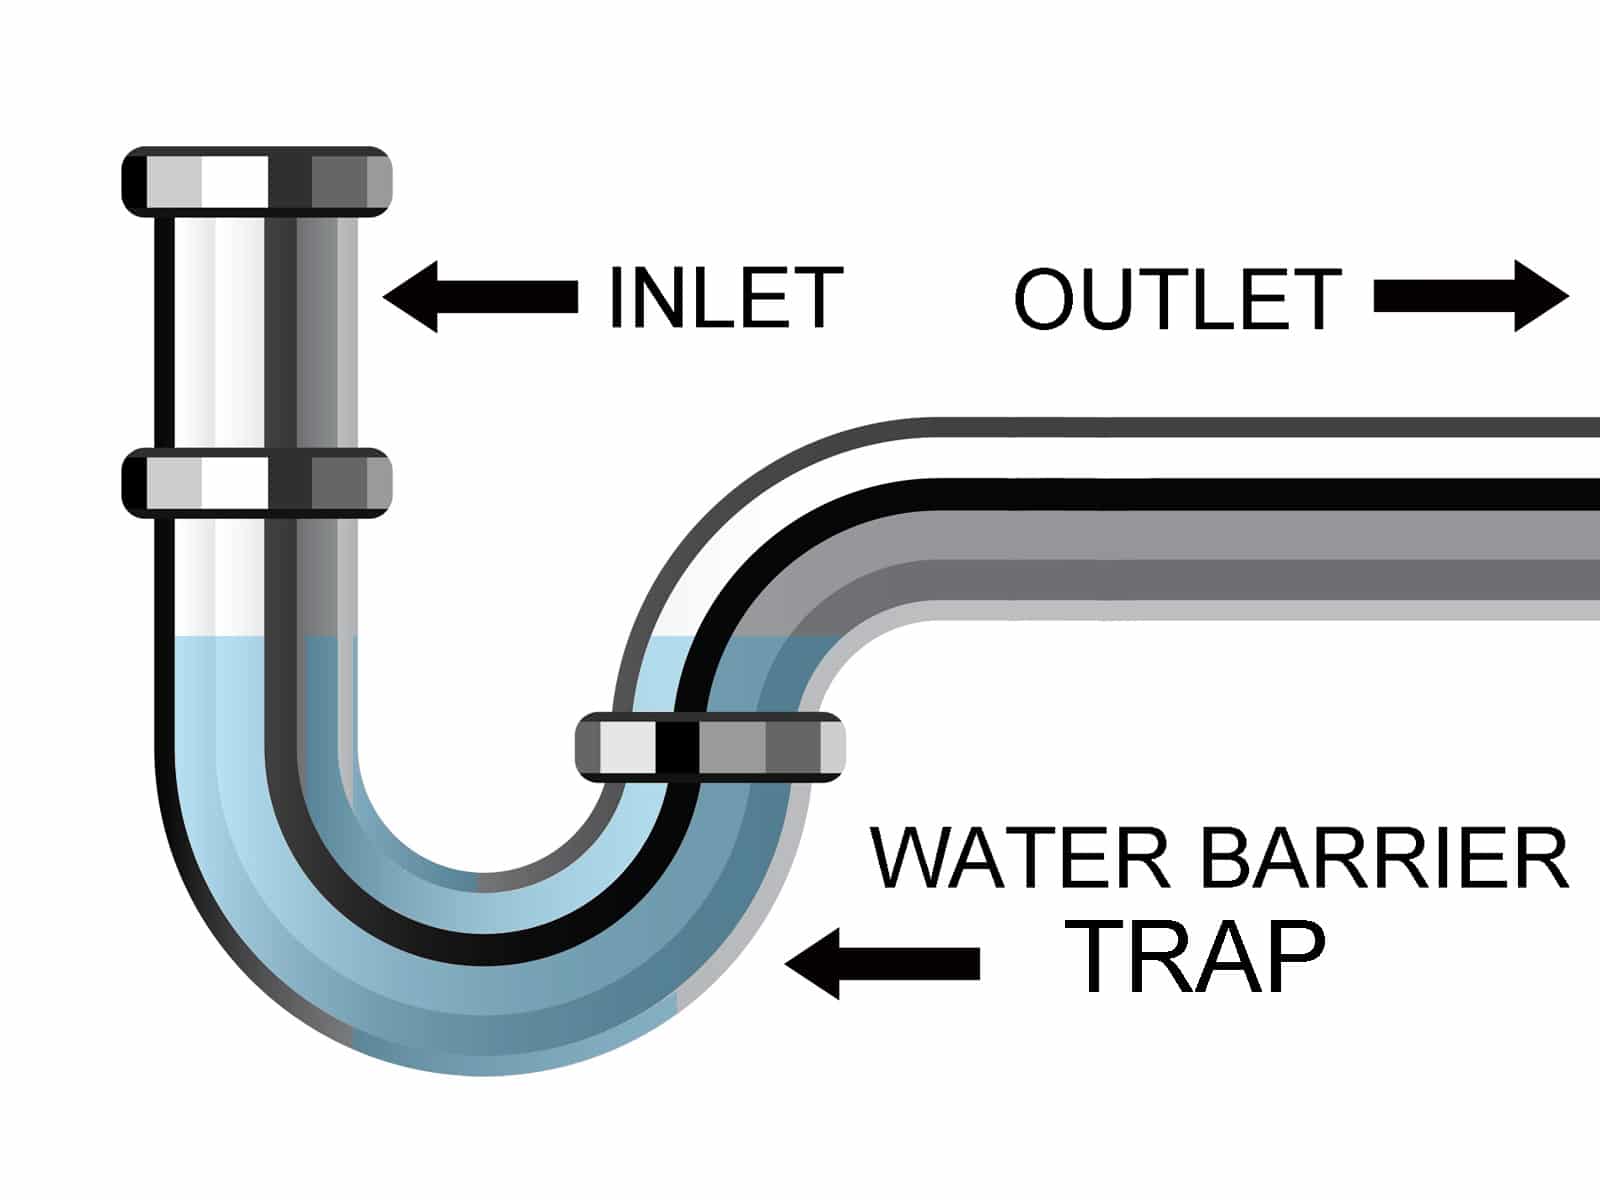 Sewer Traps In Your Home Make Your Drain System Function Properly